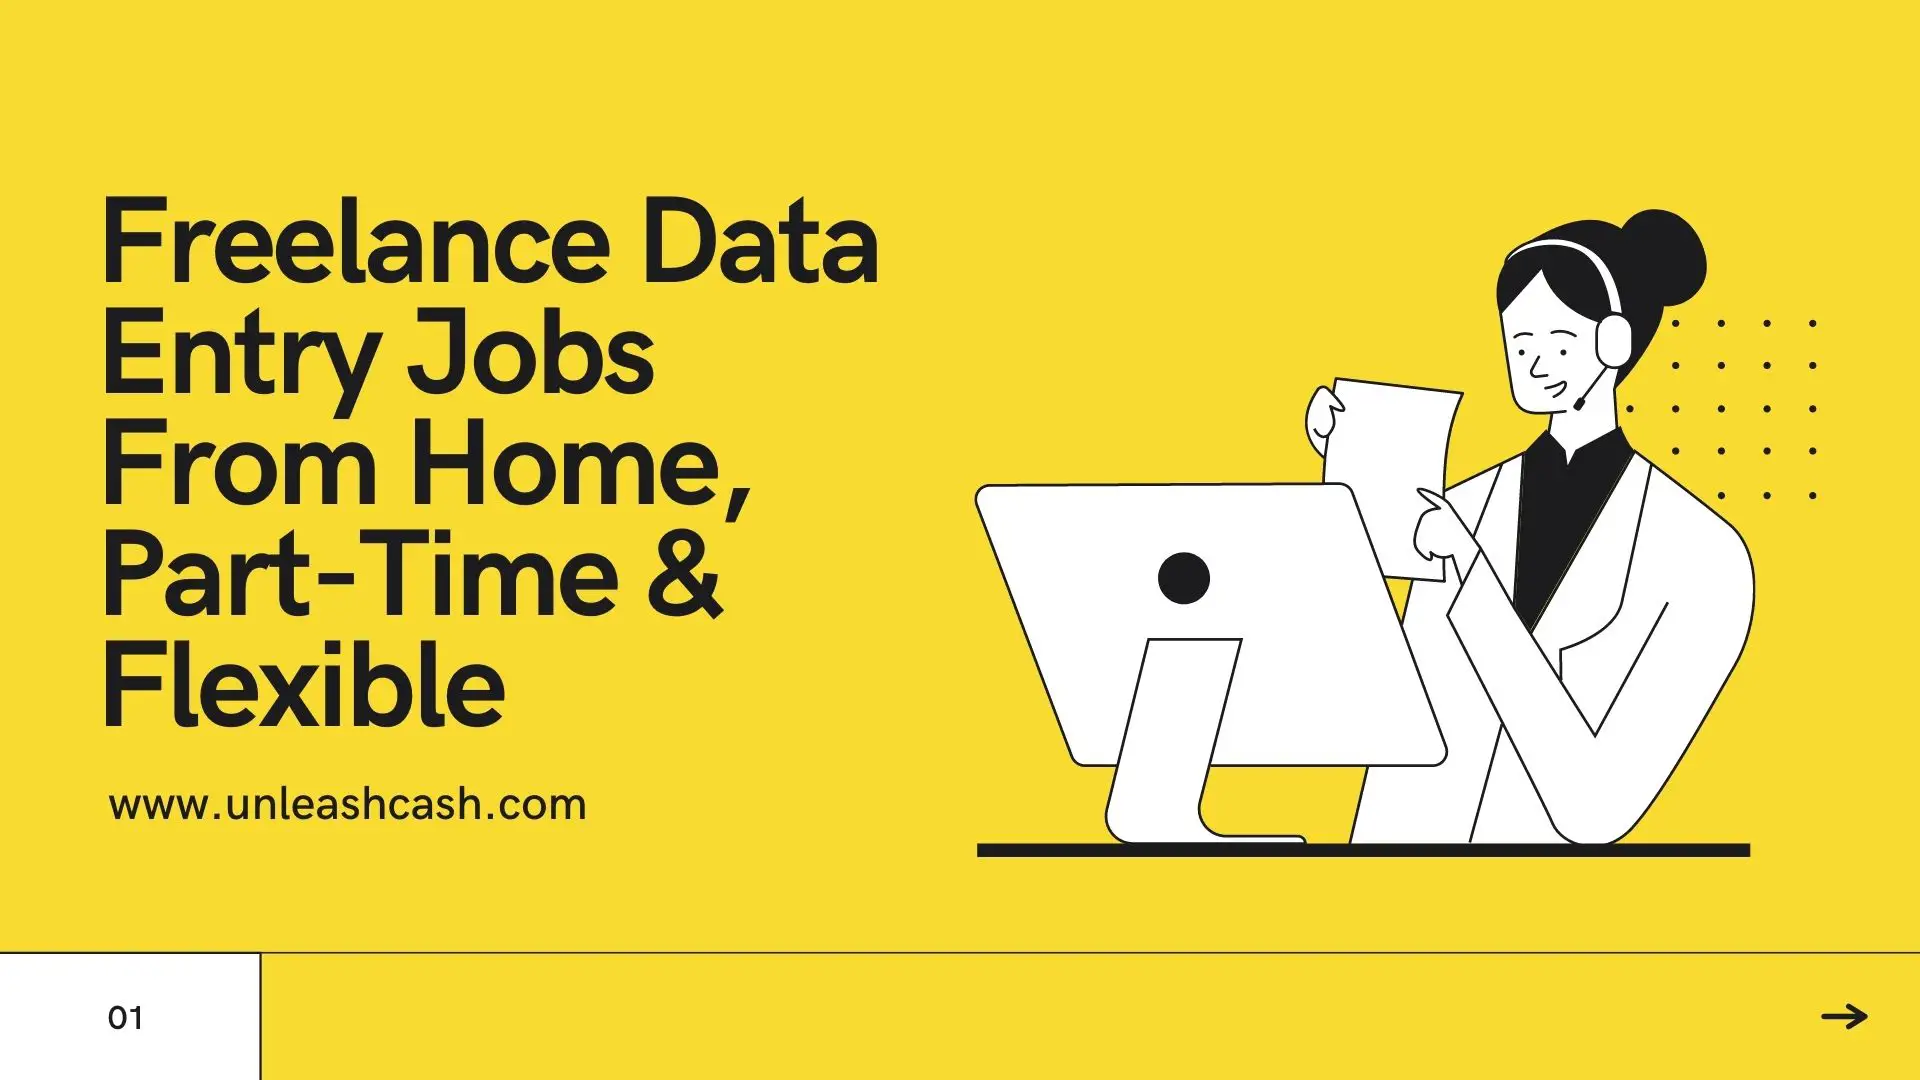 Freelance Data Entry Jobs From Home, Part-Time & Flexible